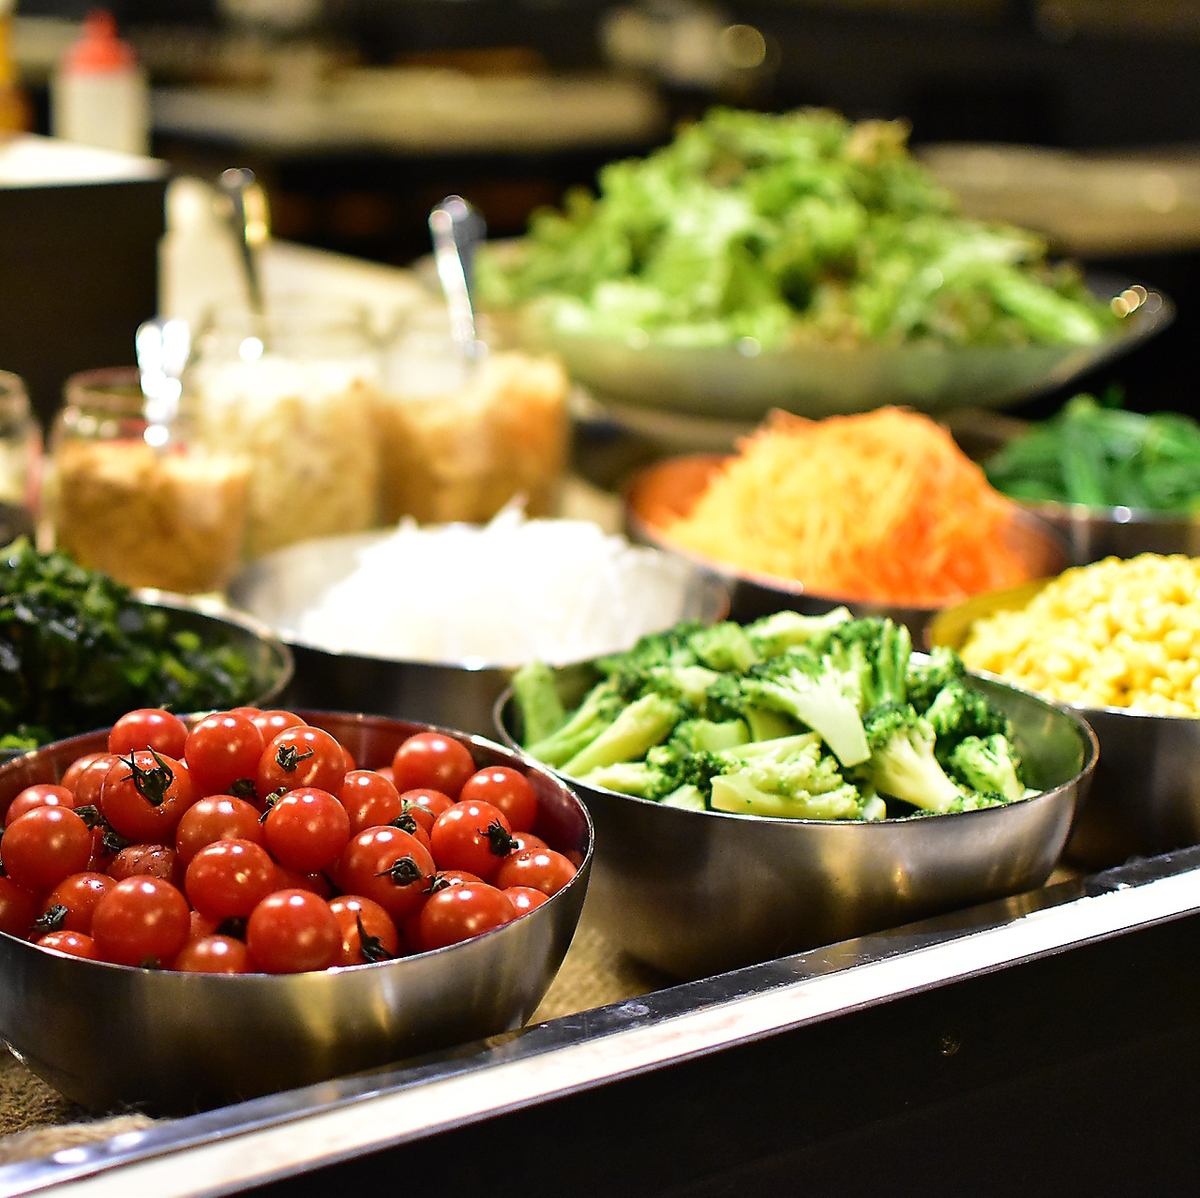 All-you-can-eat salad buffet using seasonal vegetables and authentic Churrasco